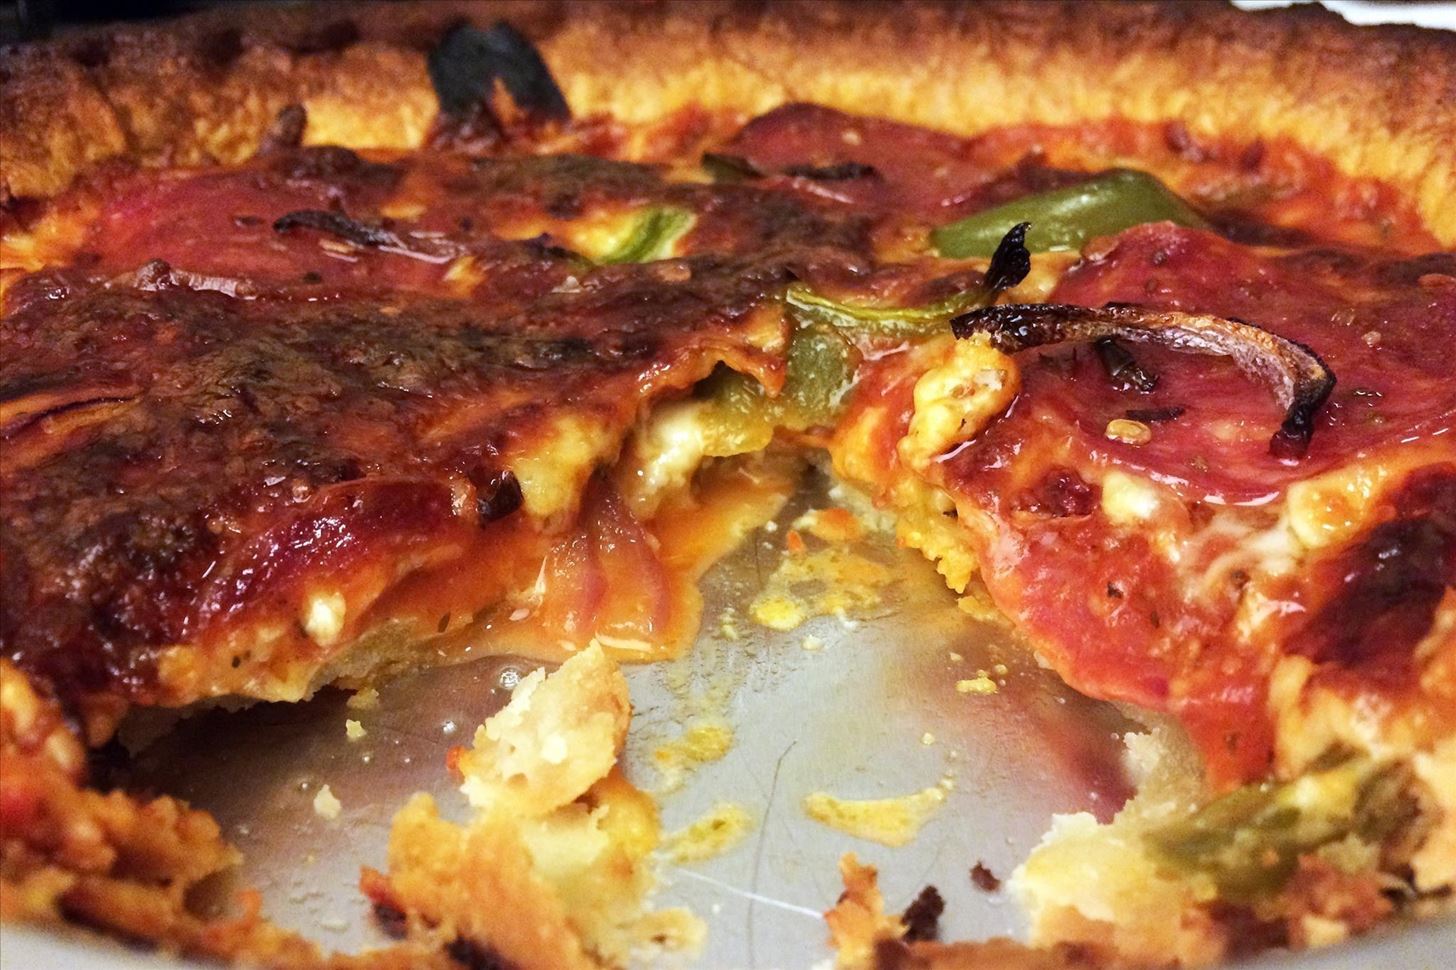 Make Killer Pizza at Home with These Easy Ready-Made “Crusts”